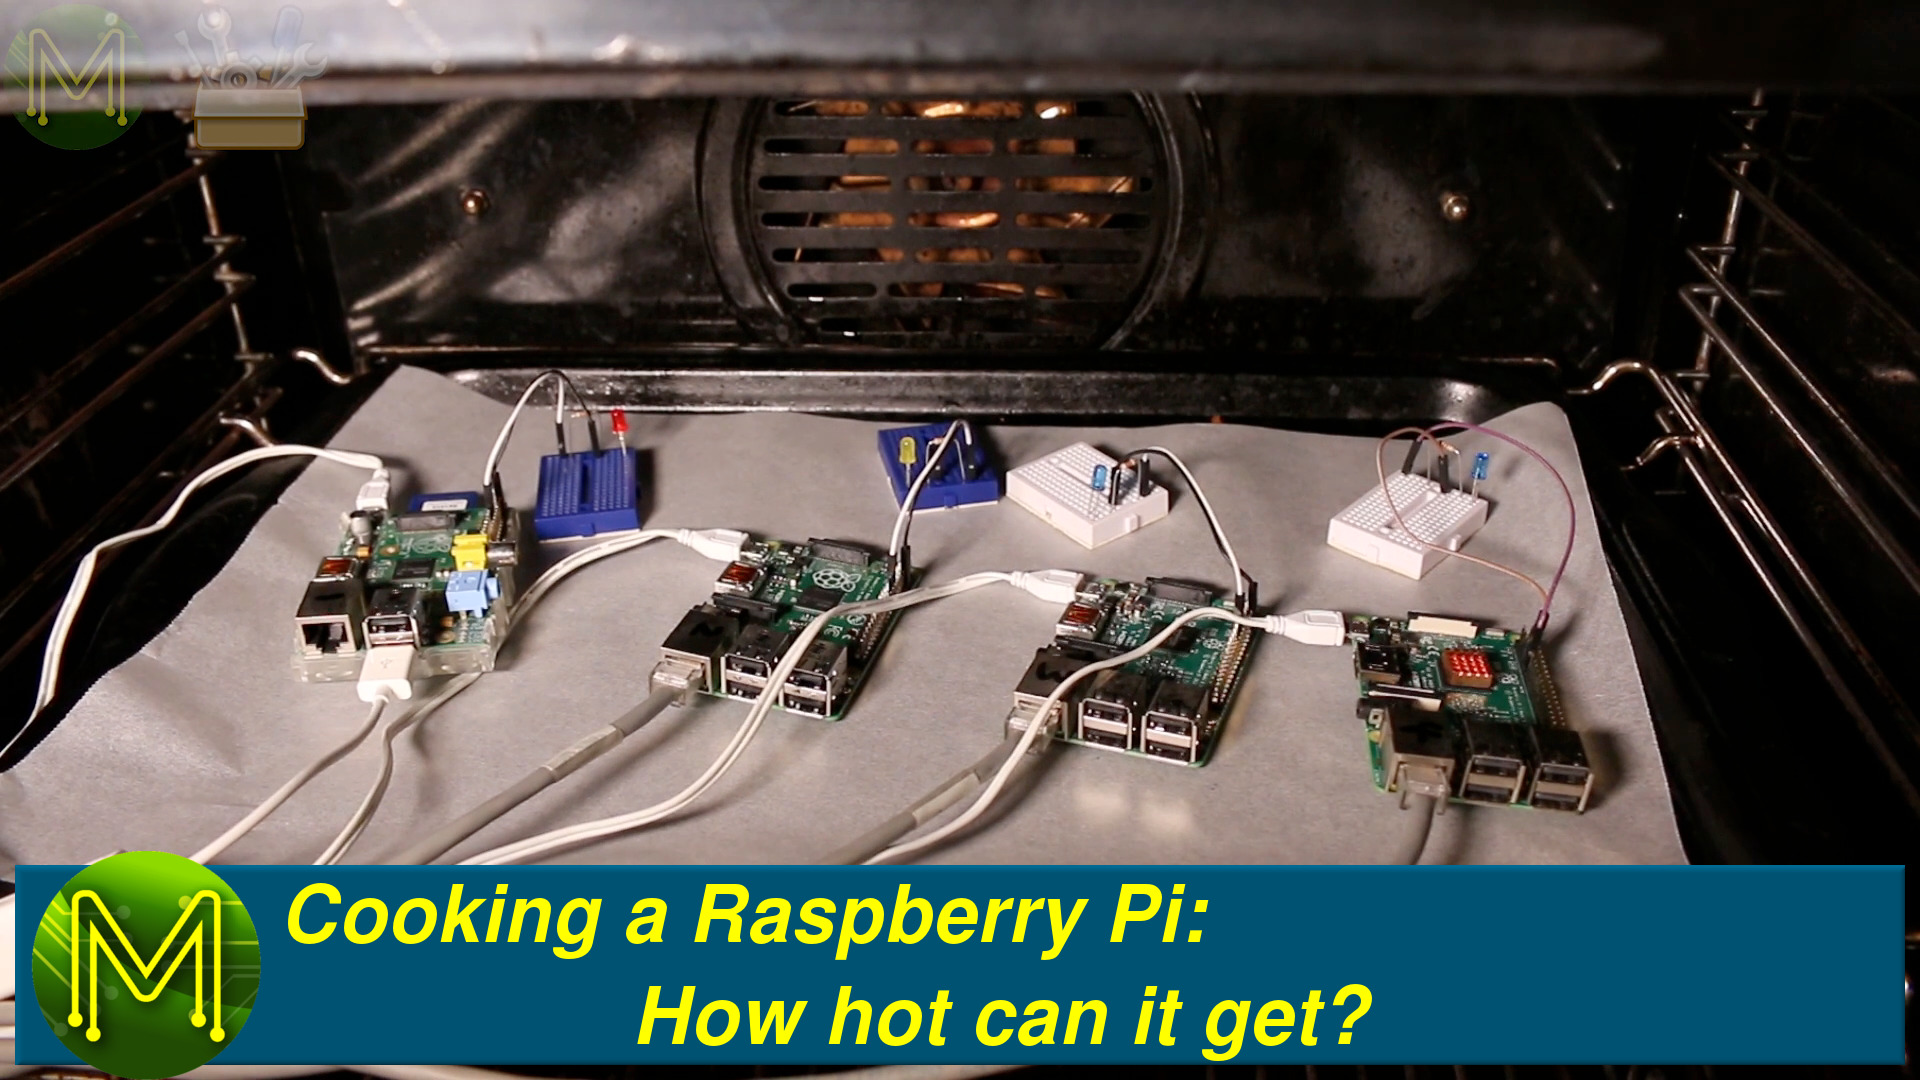 Cooking a Raspberry Pi: How hot can it get?